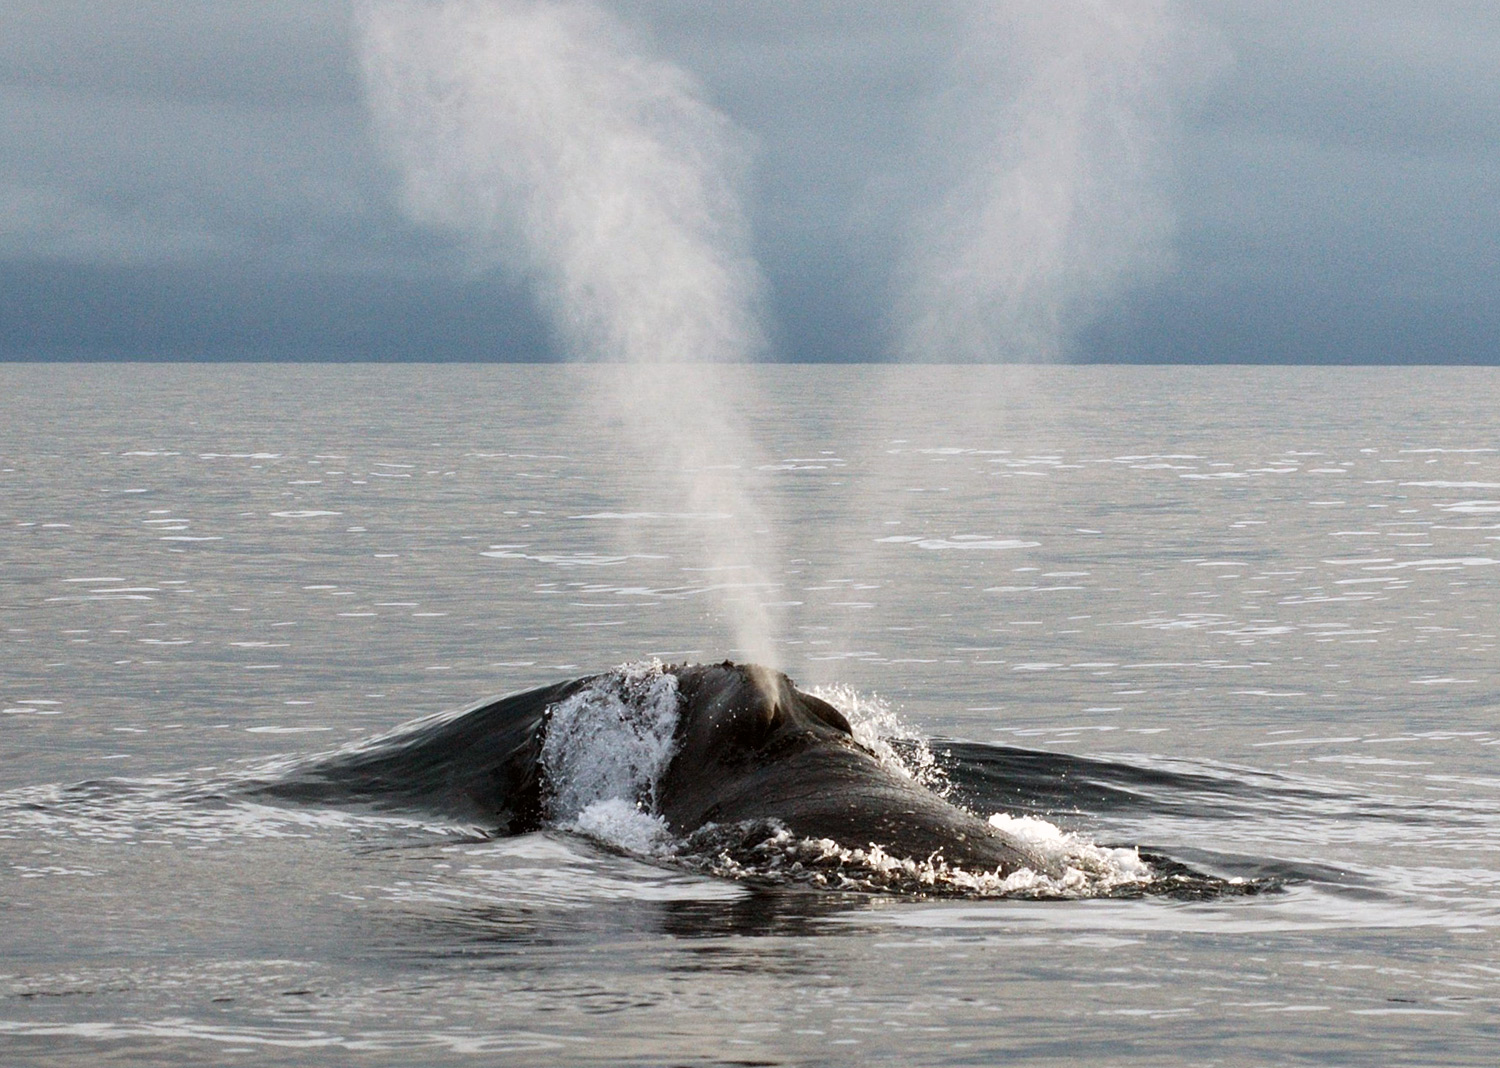 Right whale blow